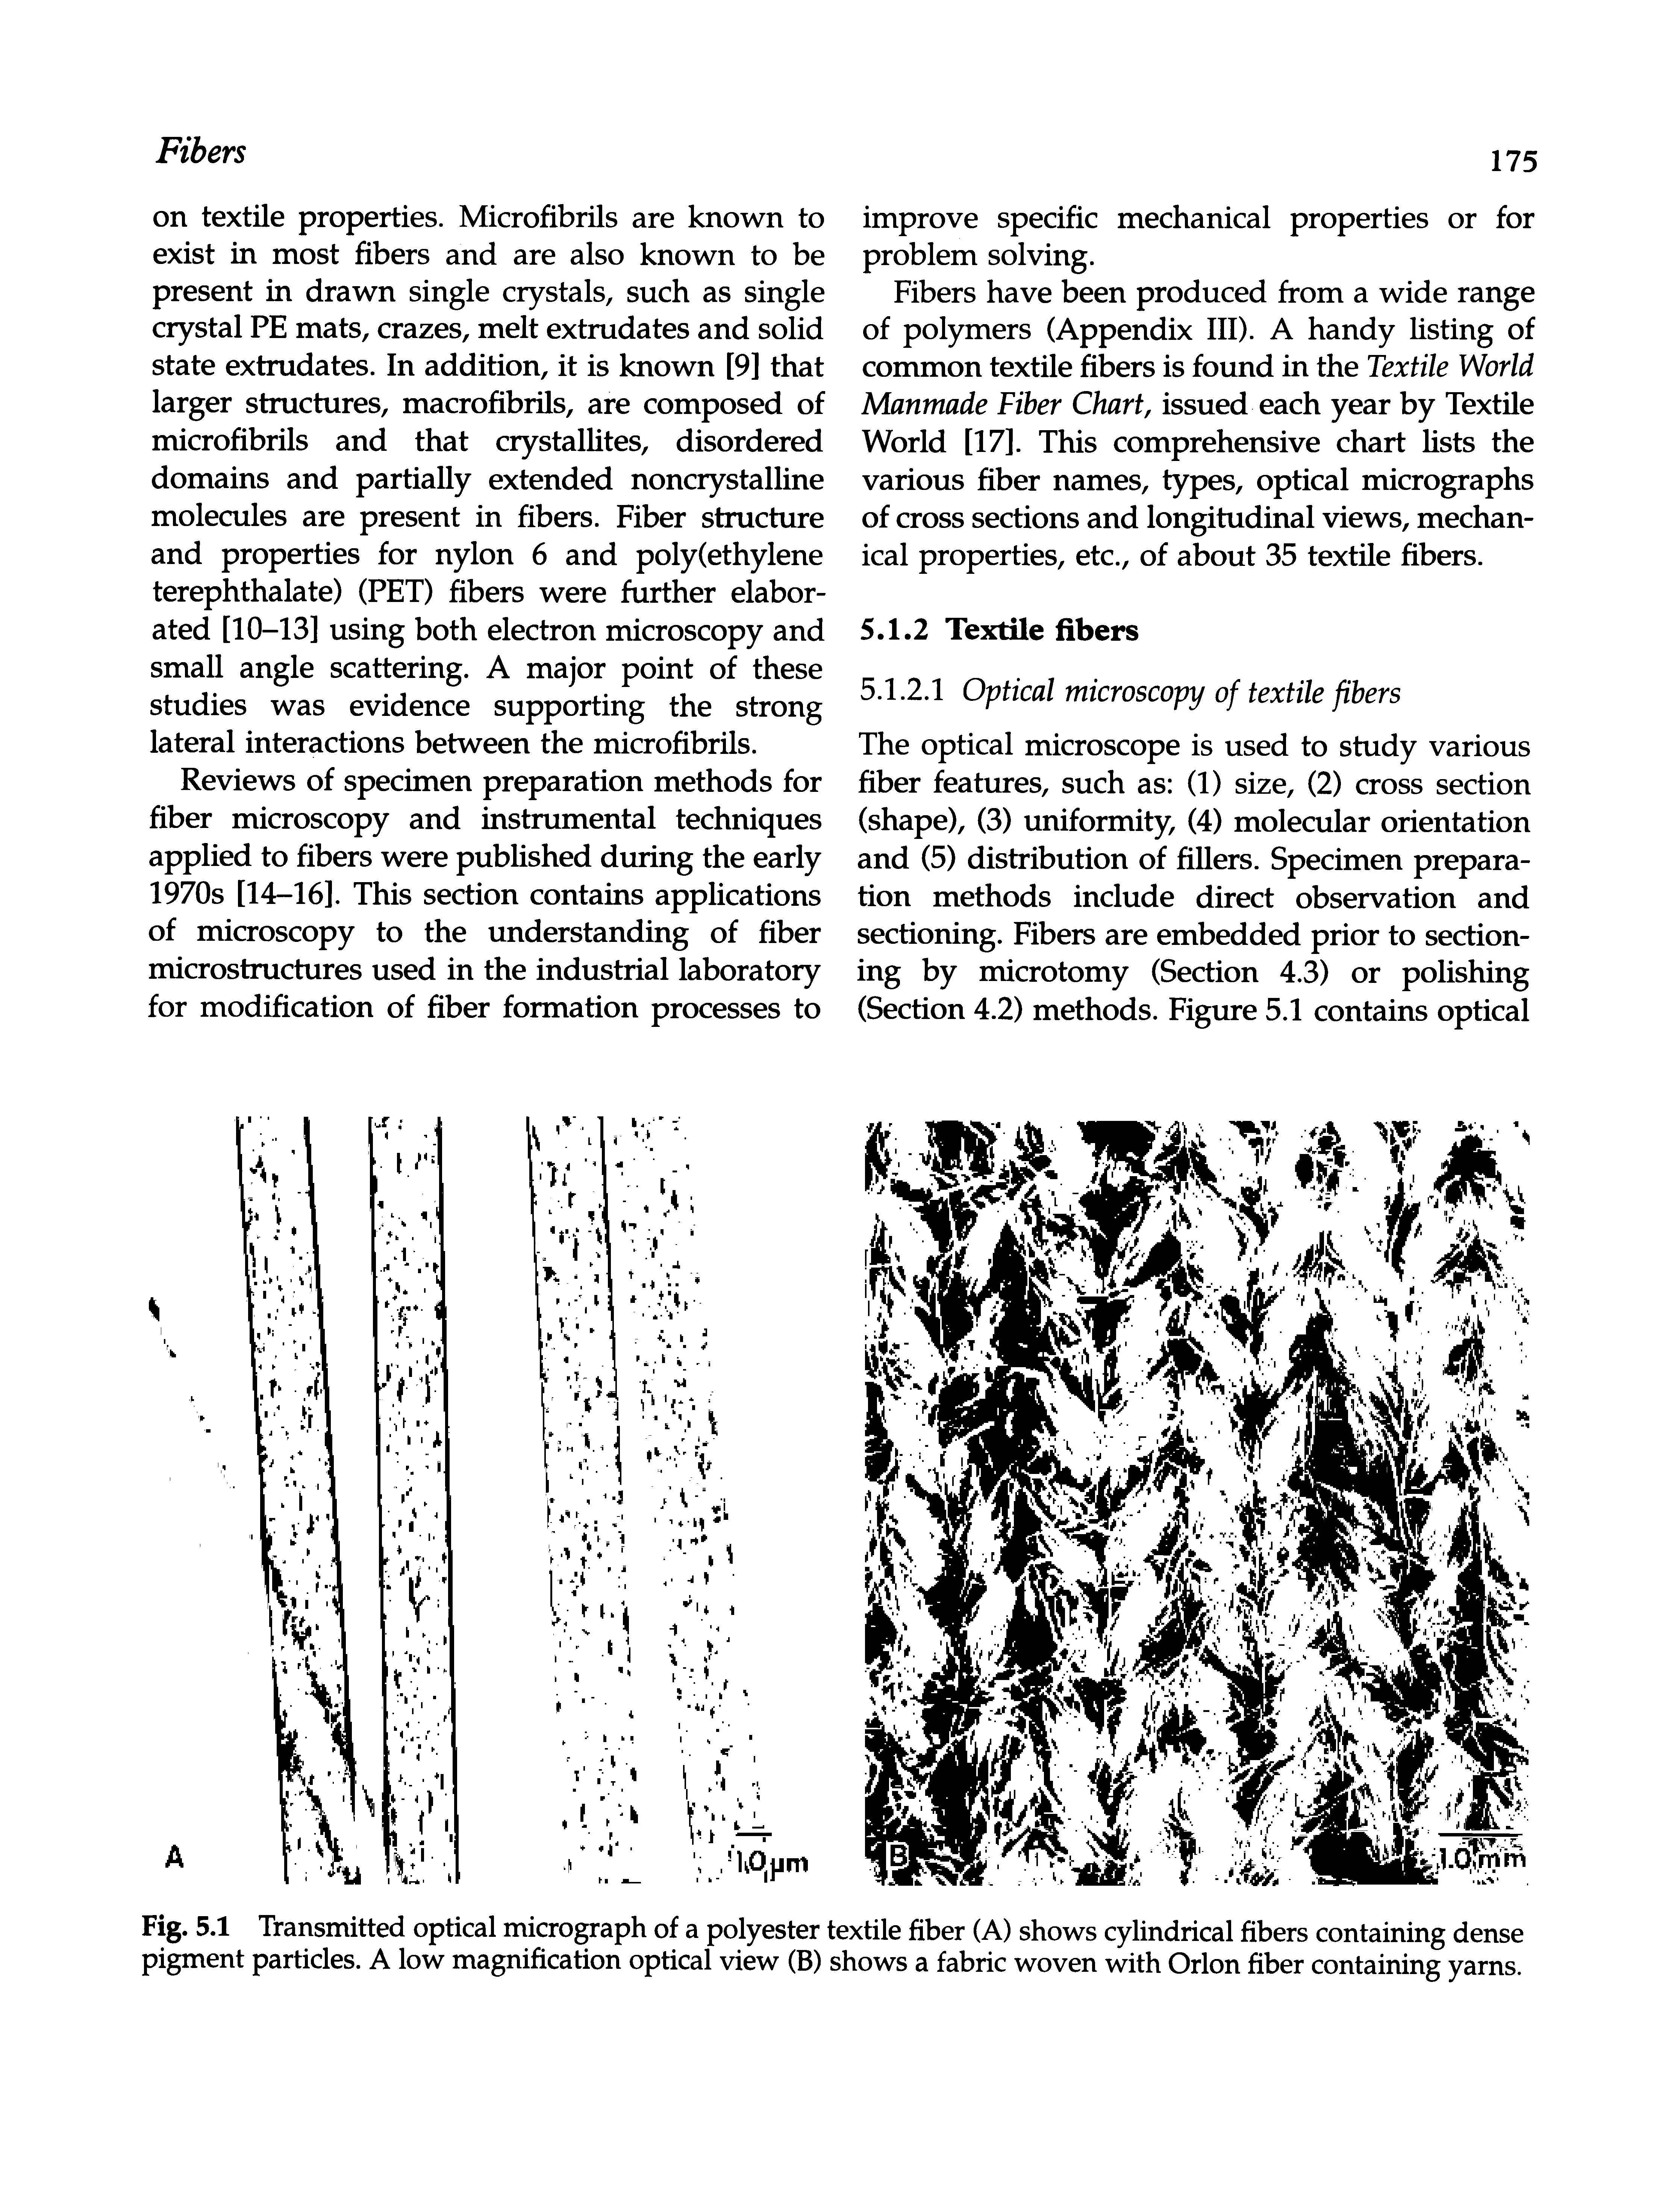 Fig. 5.1 Transmitted optical micrograph of a polyester textile fiber (A) shows cyUndrical fibers containing dense pigment particles. A low magnification optical view (B) shows a fabric woven with Orion fiber containing yarns.